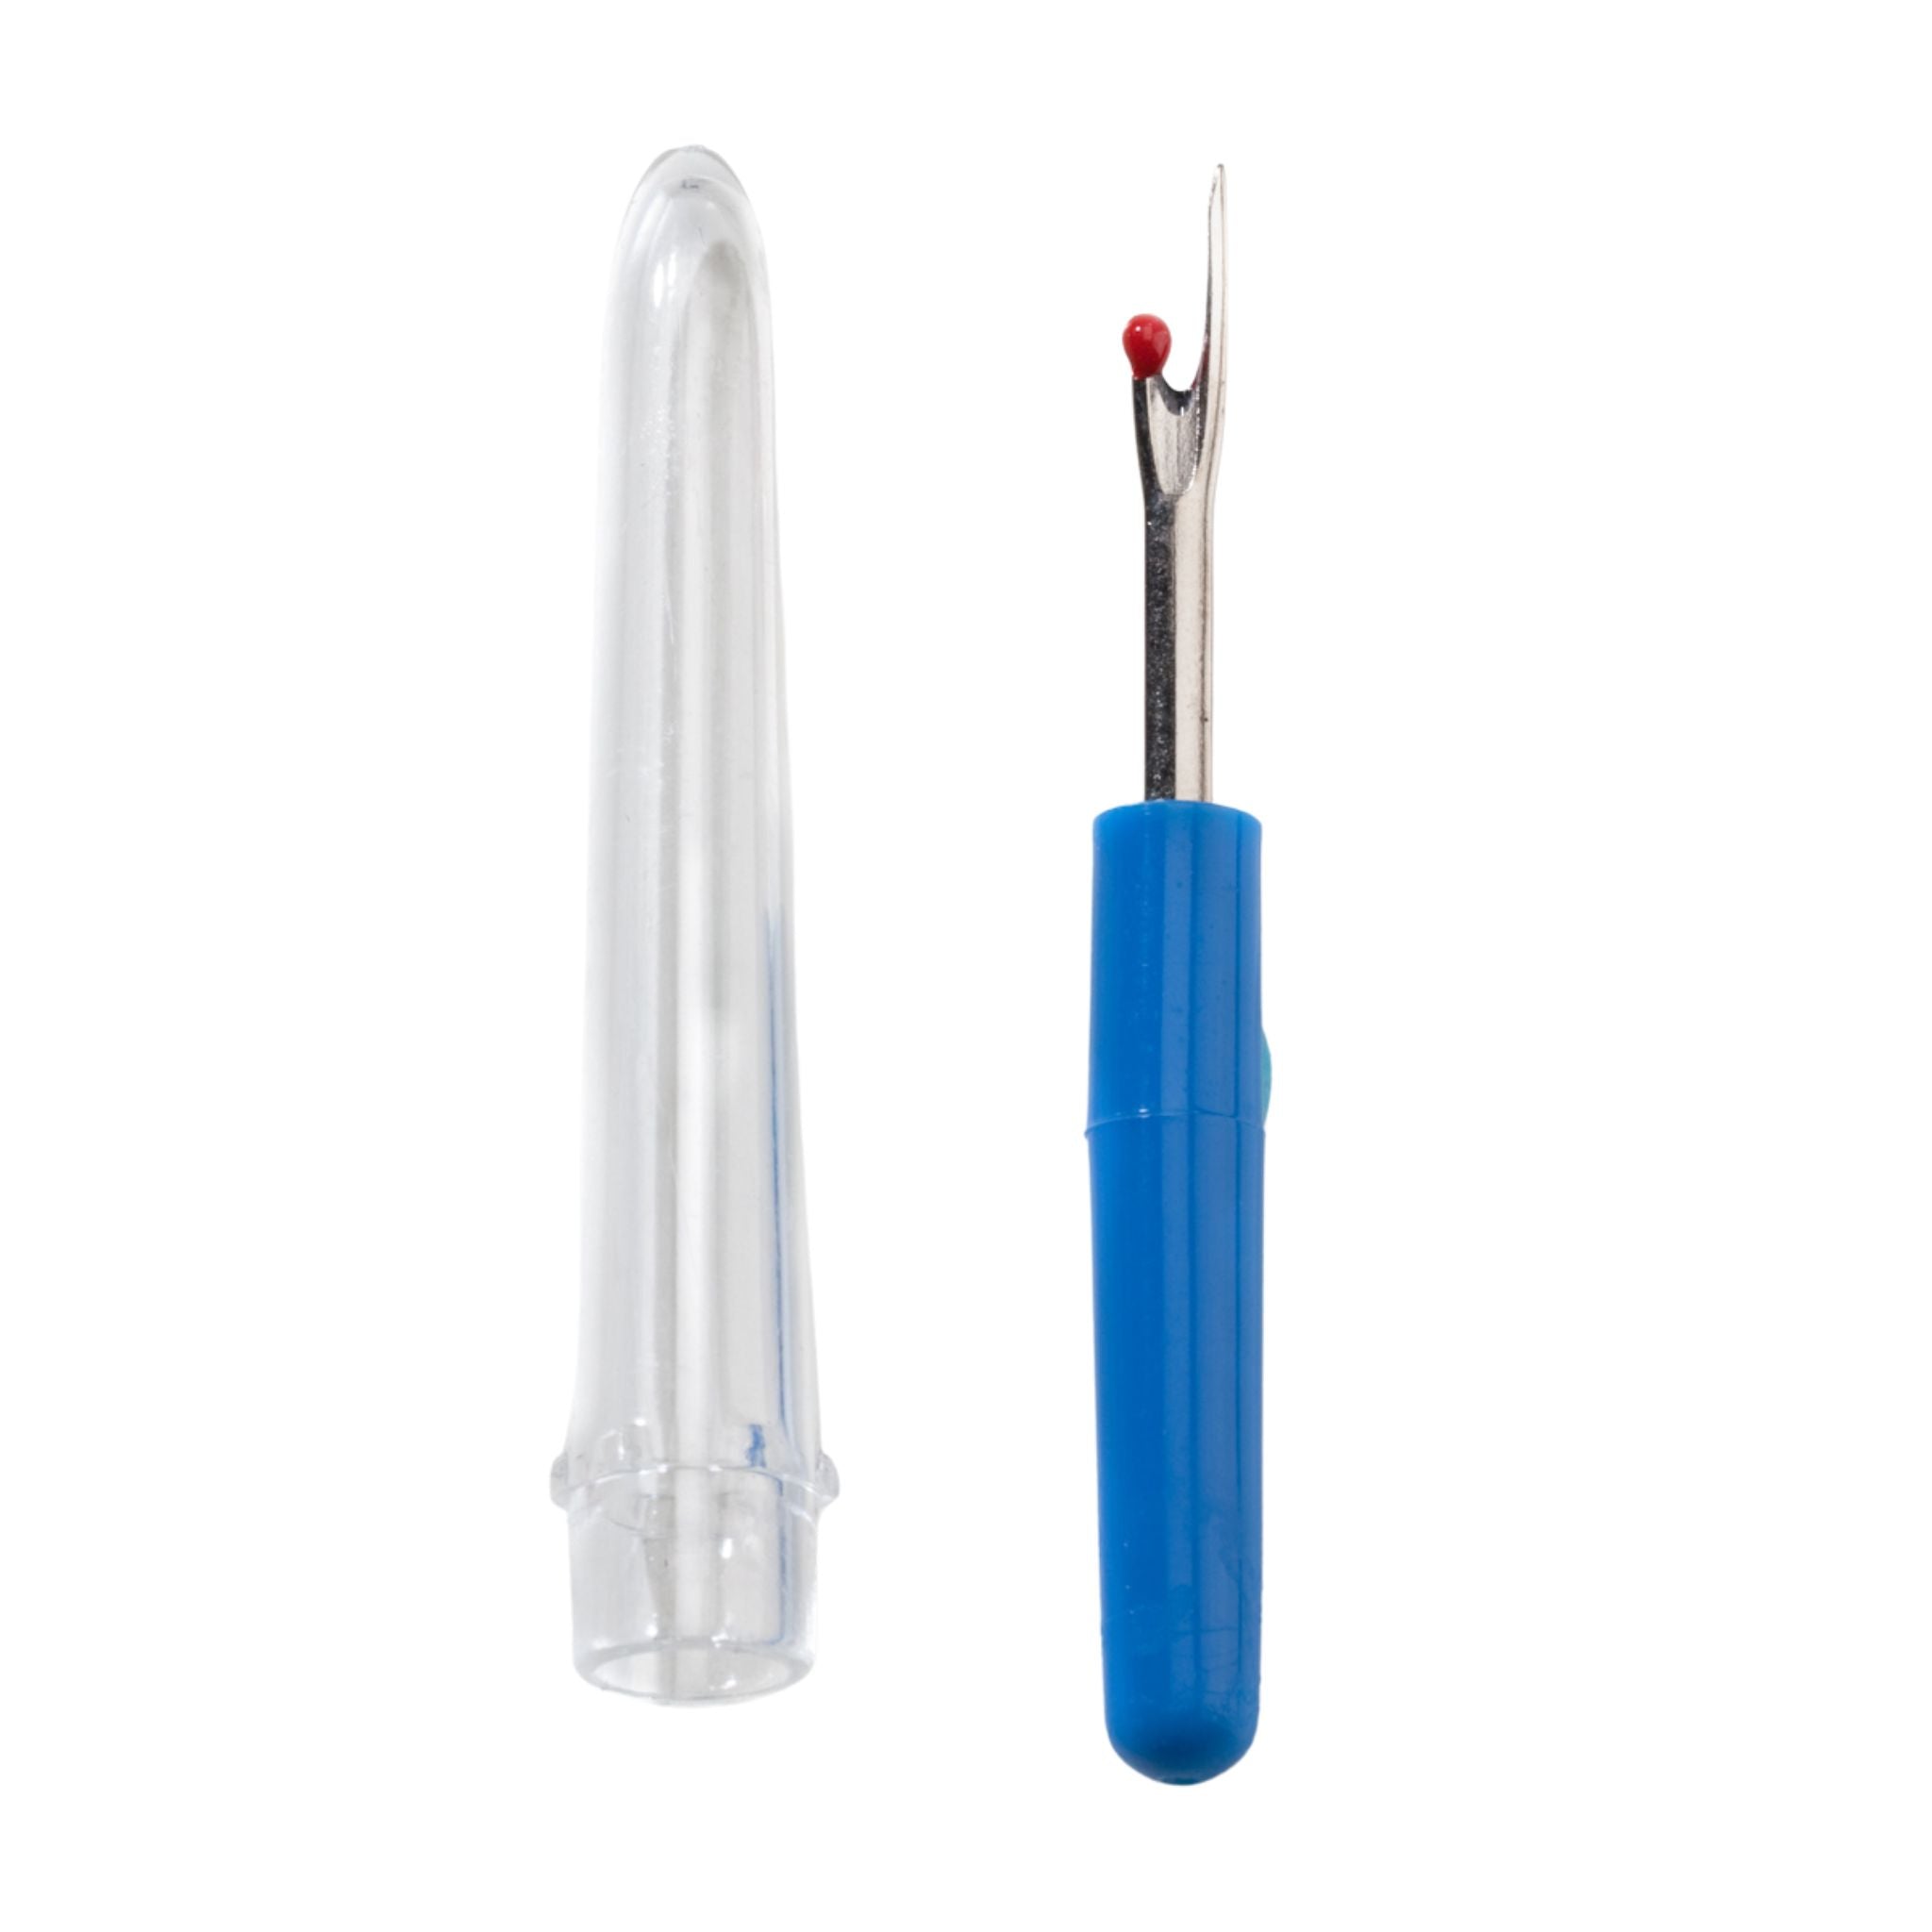 Loops & Threads Deluxe Seam Ripper - Each